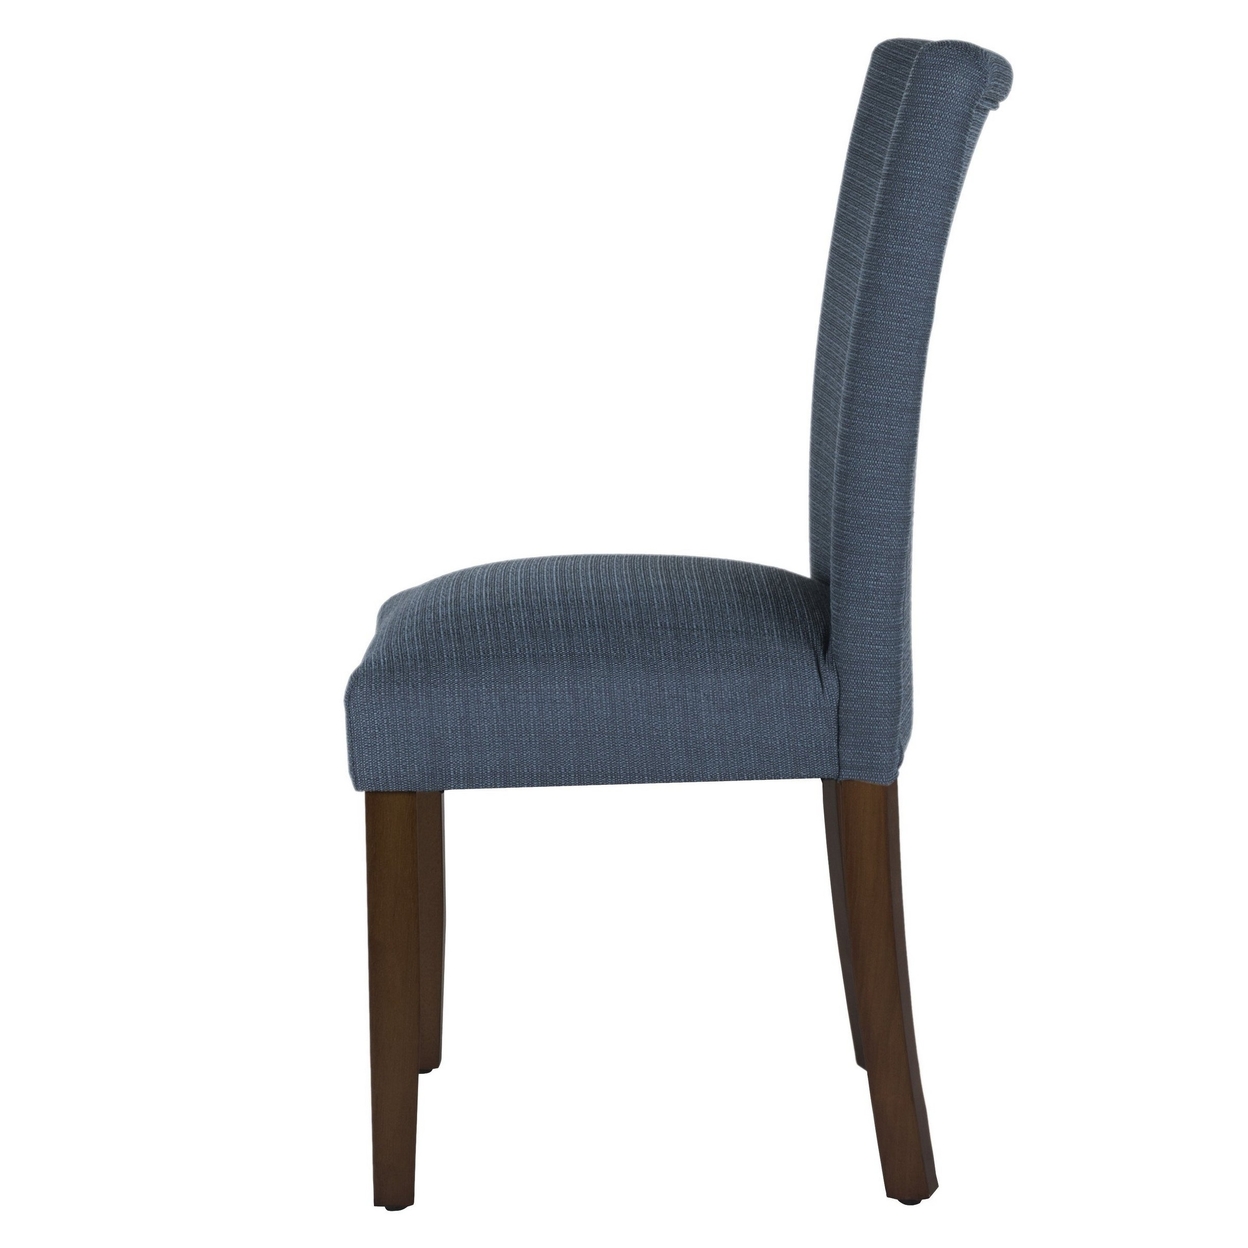 Fabric Upholstered Wooden Parson Dining Chair With Splayed Back, Navy Blue And Brown- Saltoro Sherpi